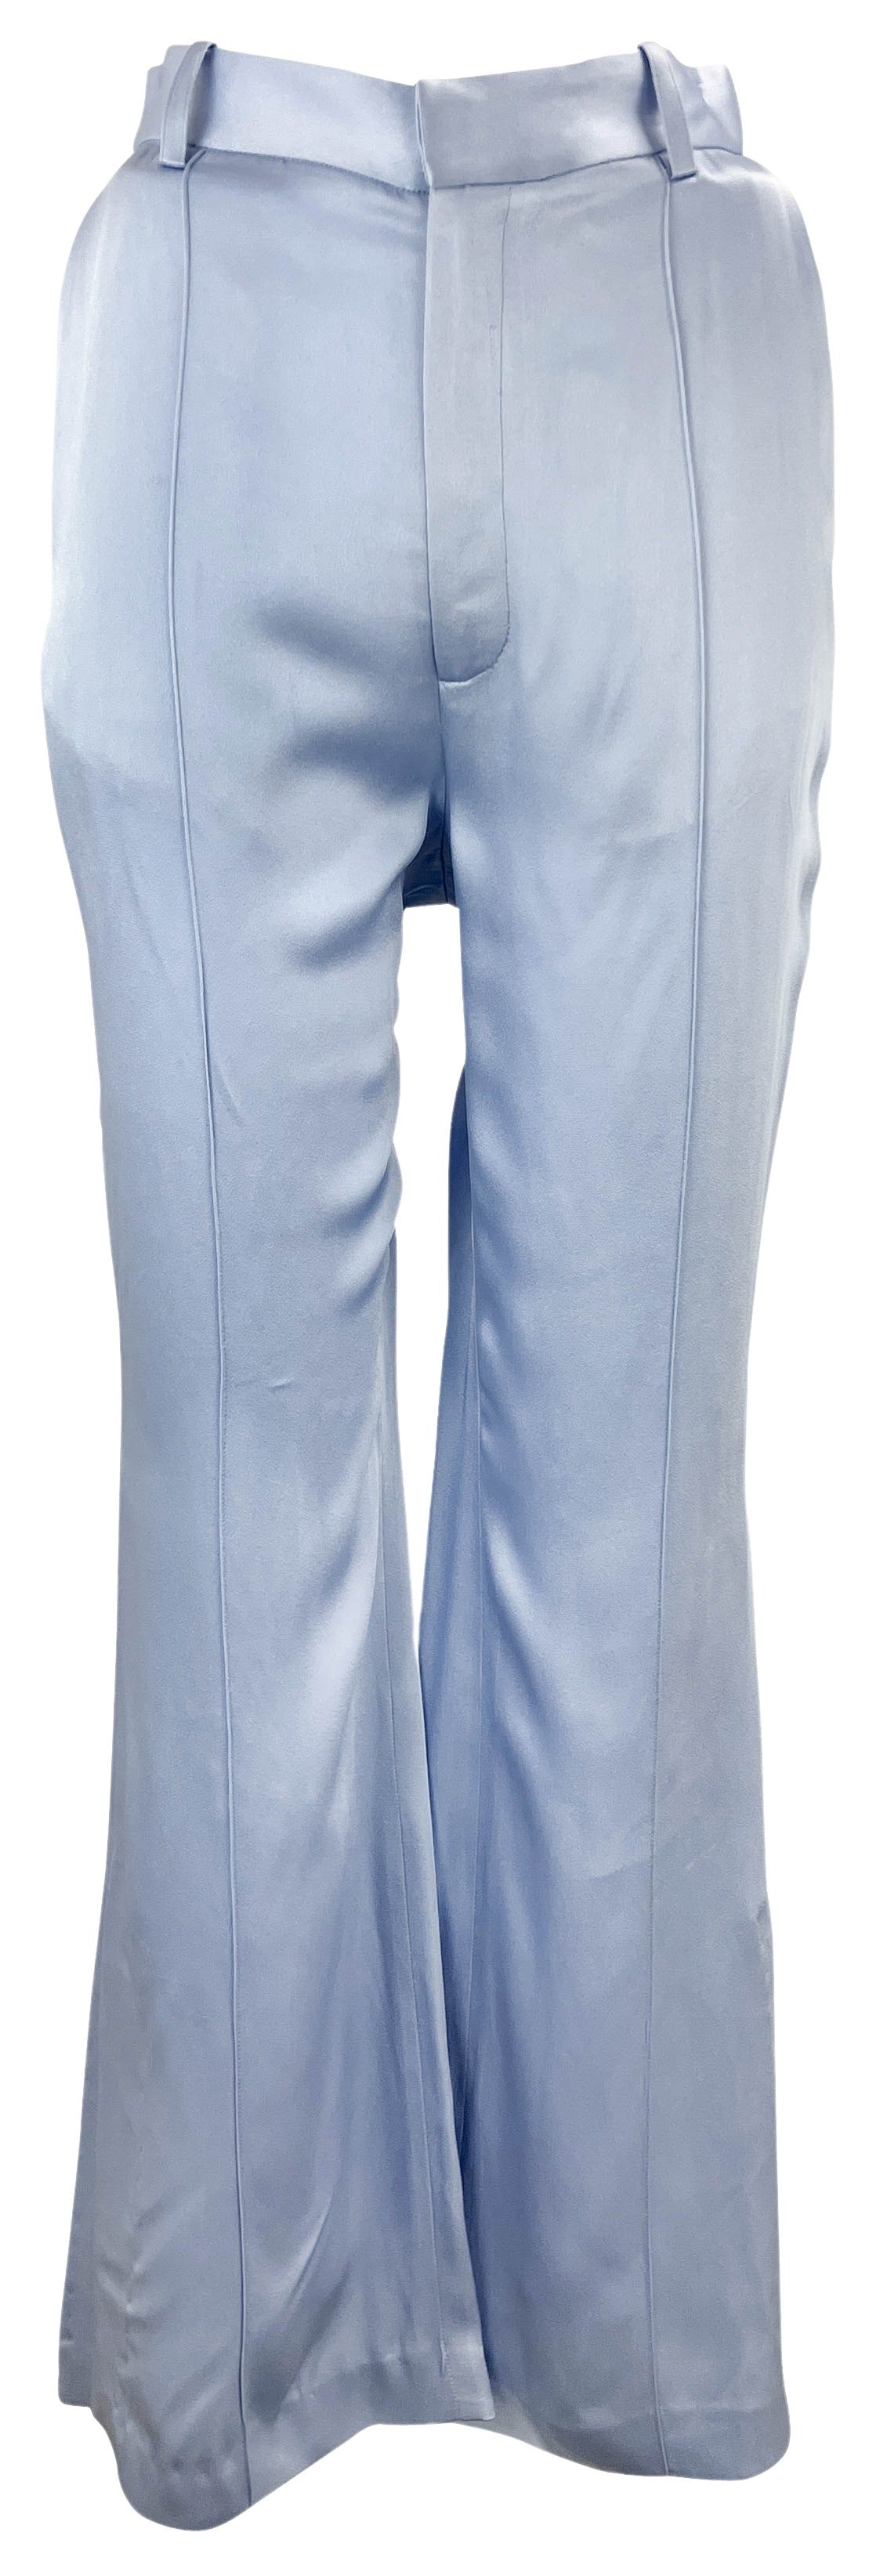 LAPOINTE Satin Trousers in Light Blue - Discounts on LaPointe at UAL